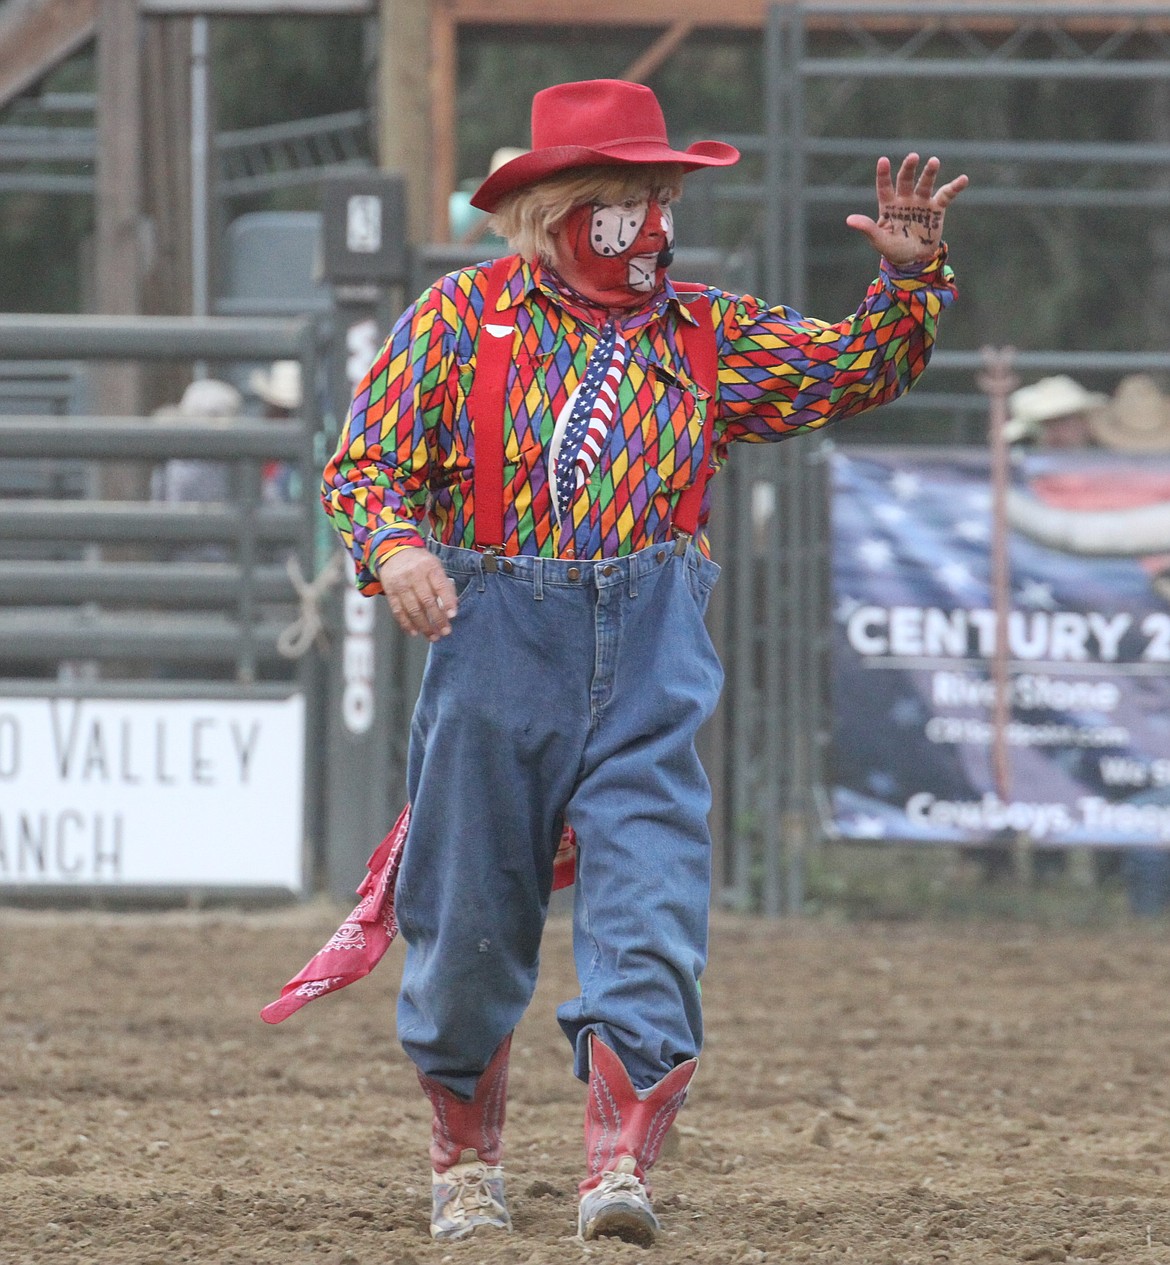 Bert Davis, world renowned rodeo clown, waves to the audience on Friday.